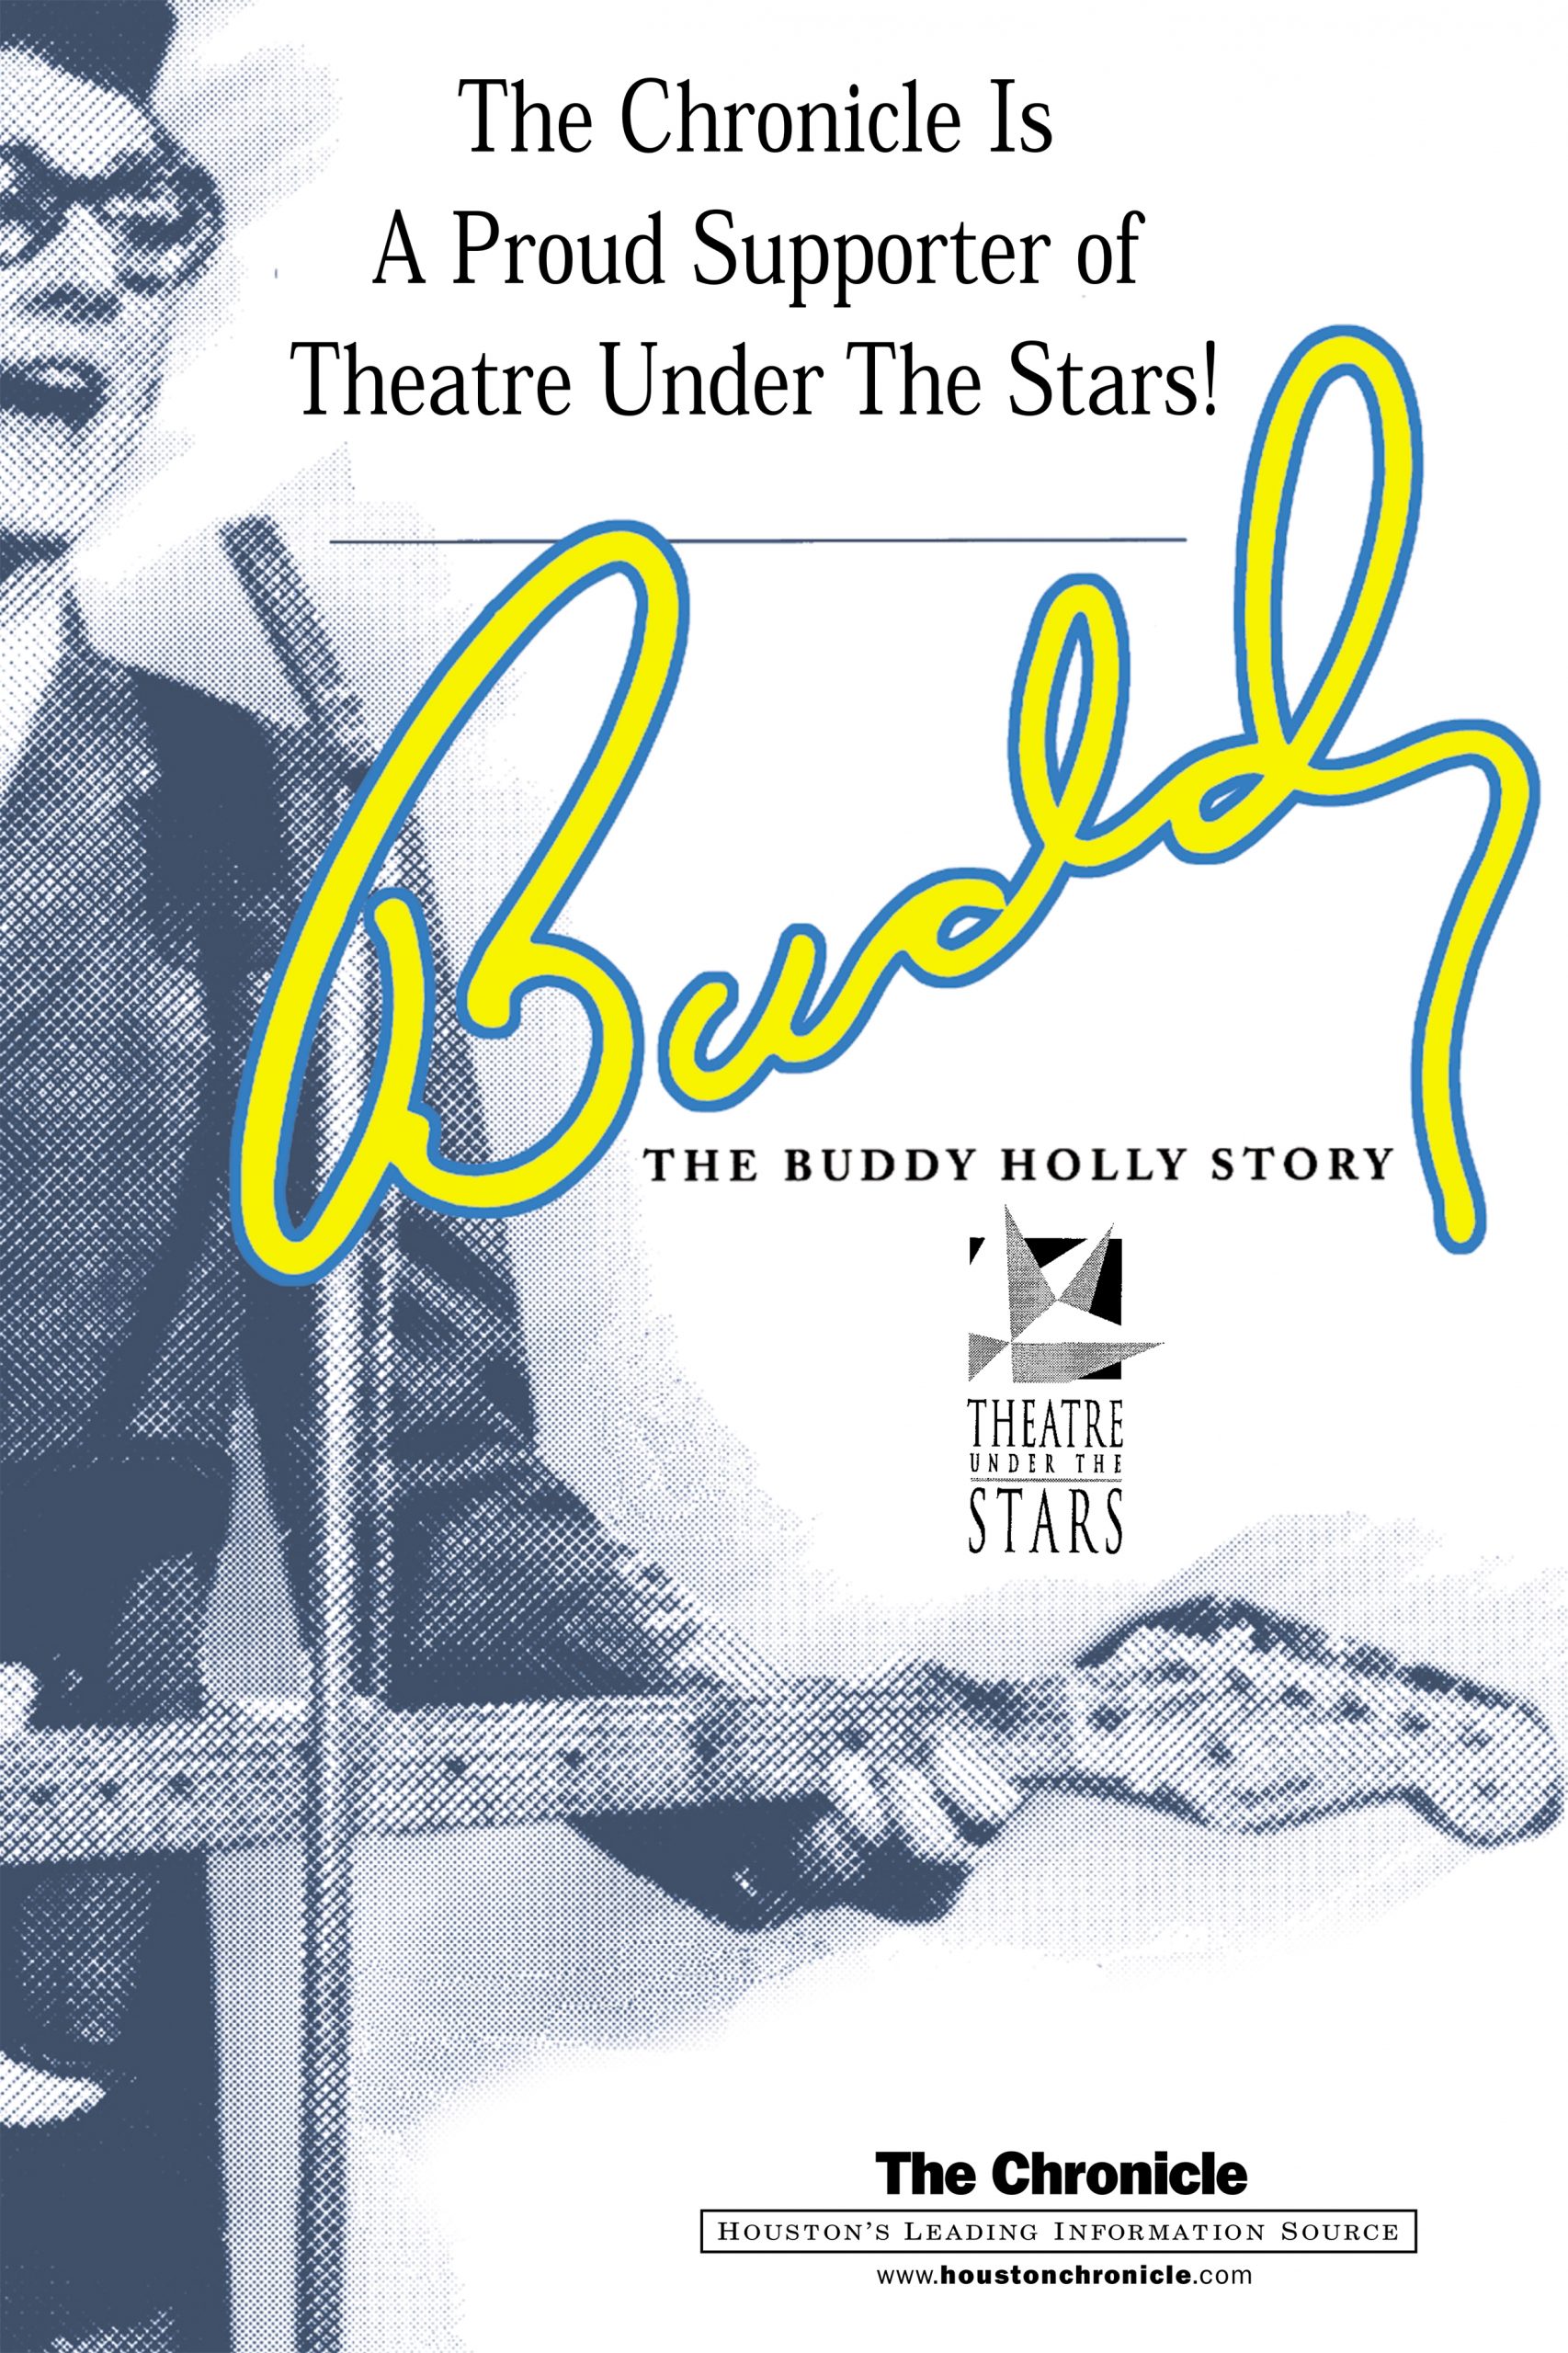 Buddy Holly Poster